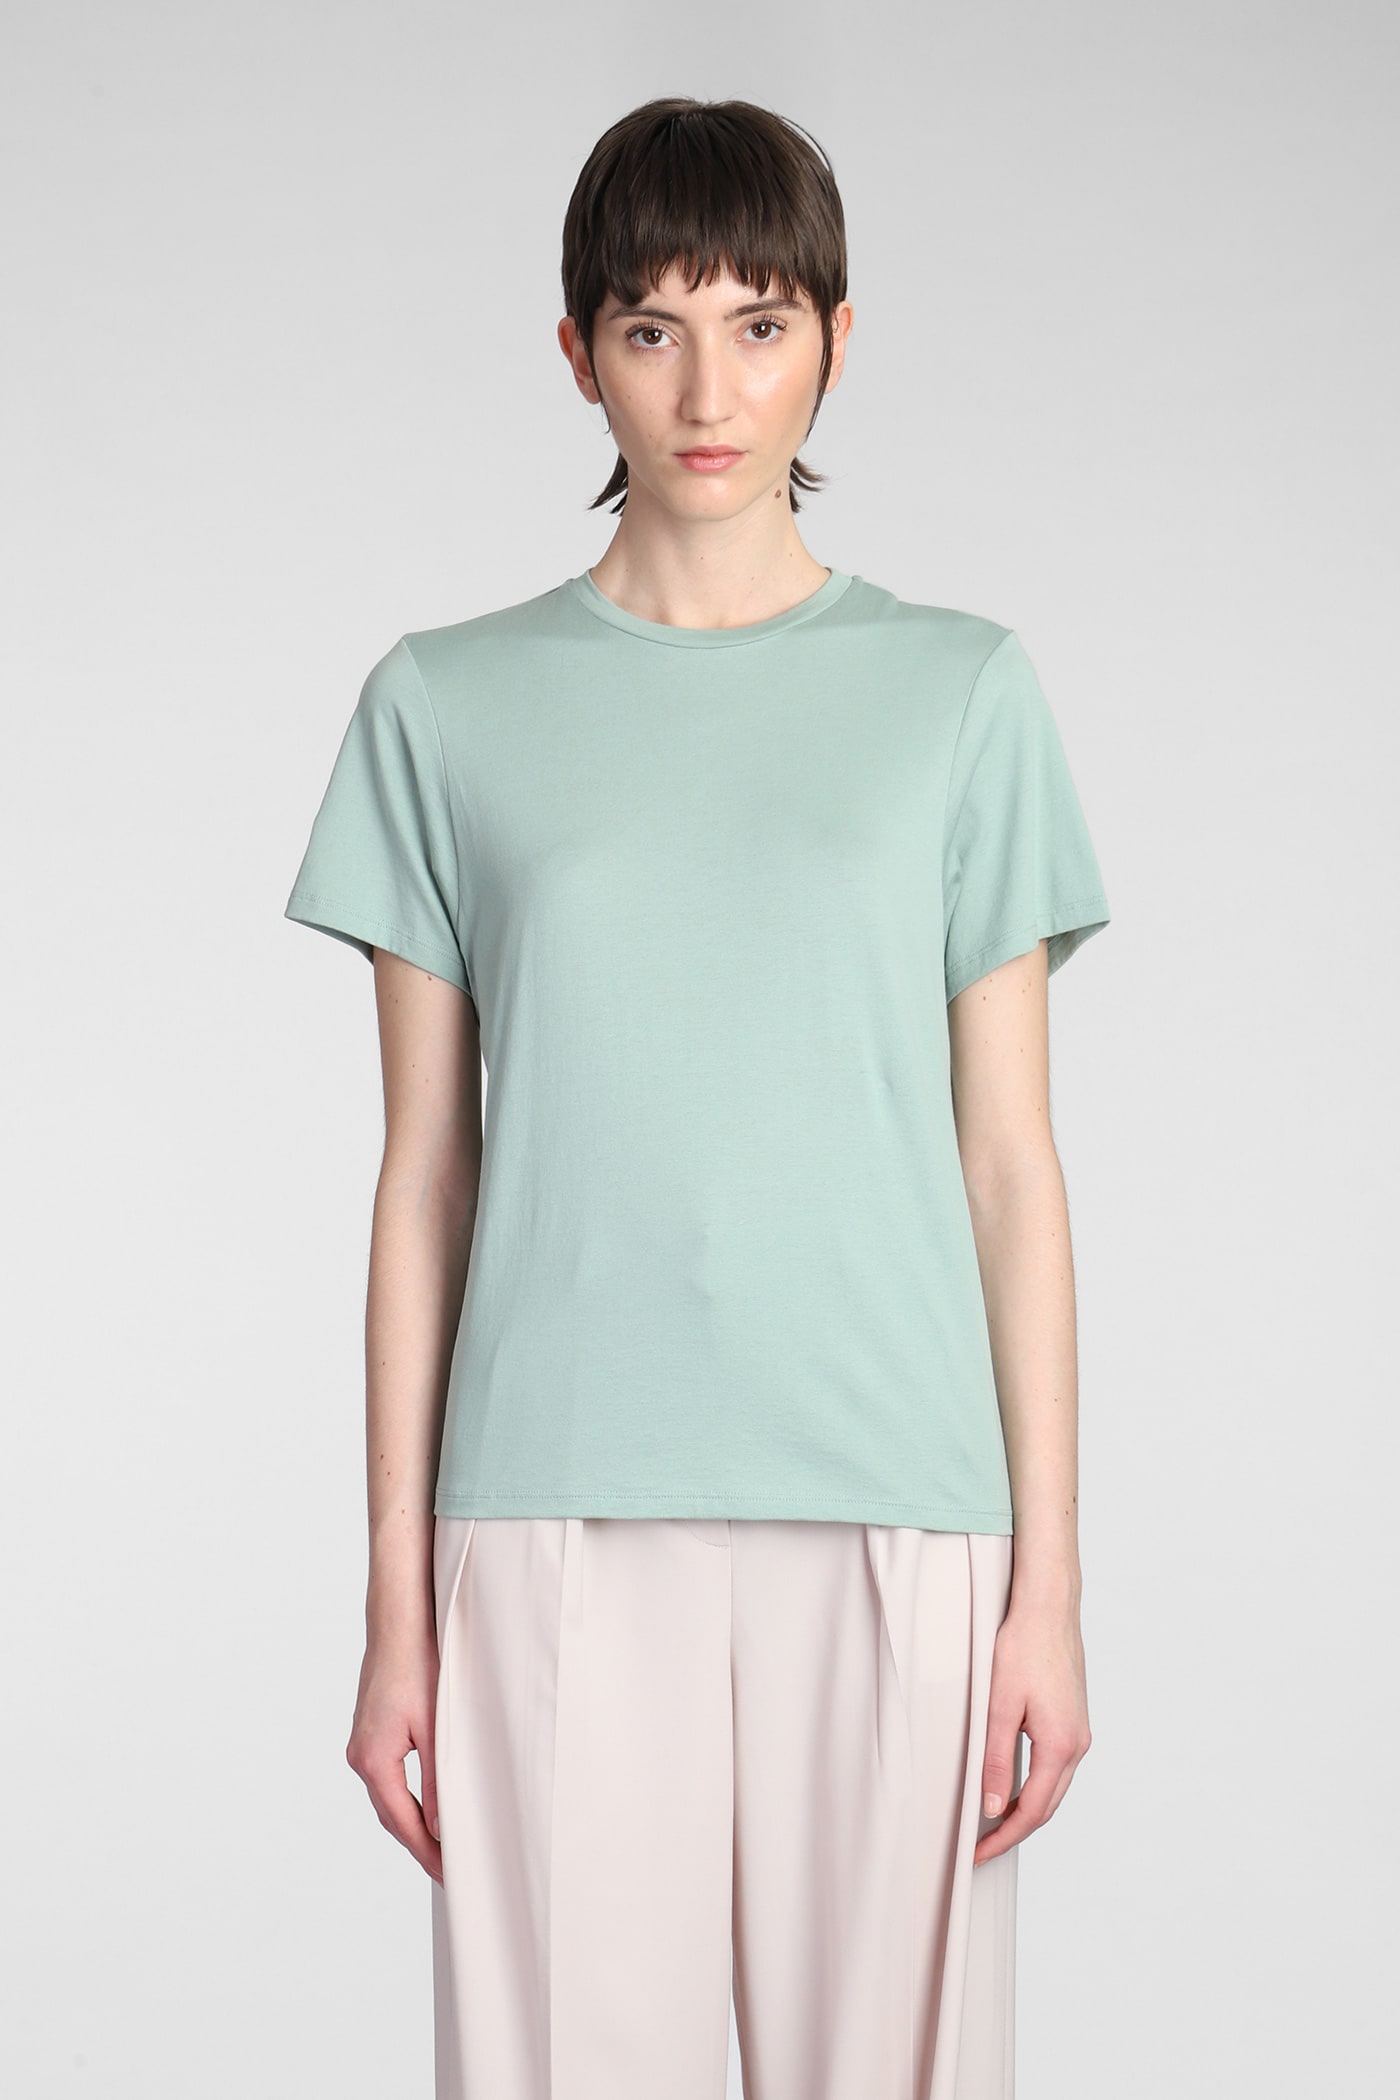 THEORY T-SHIRT IN GREEN COTTON